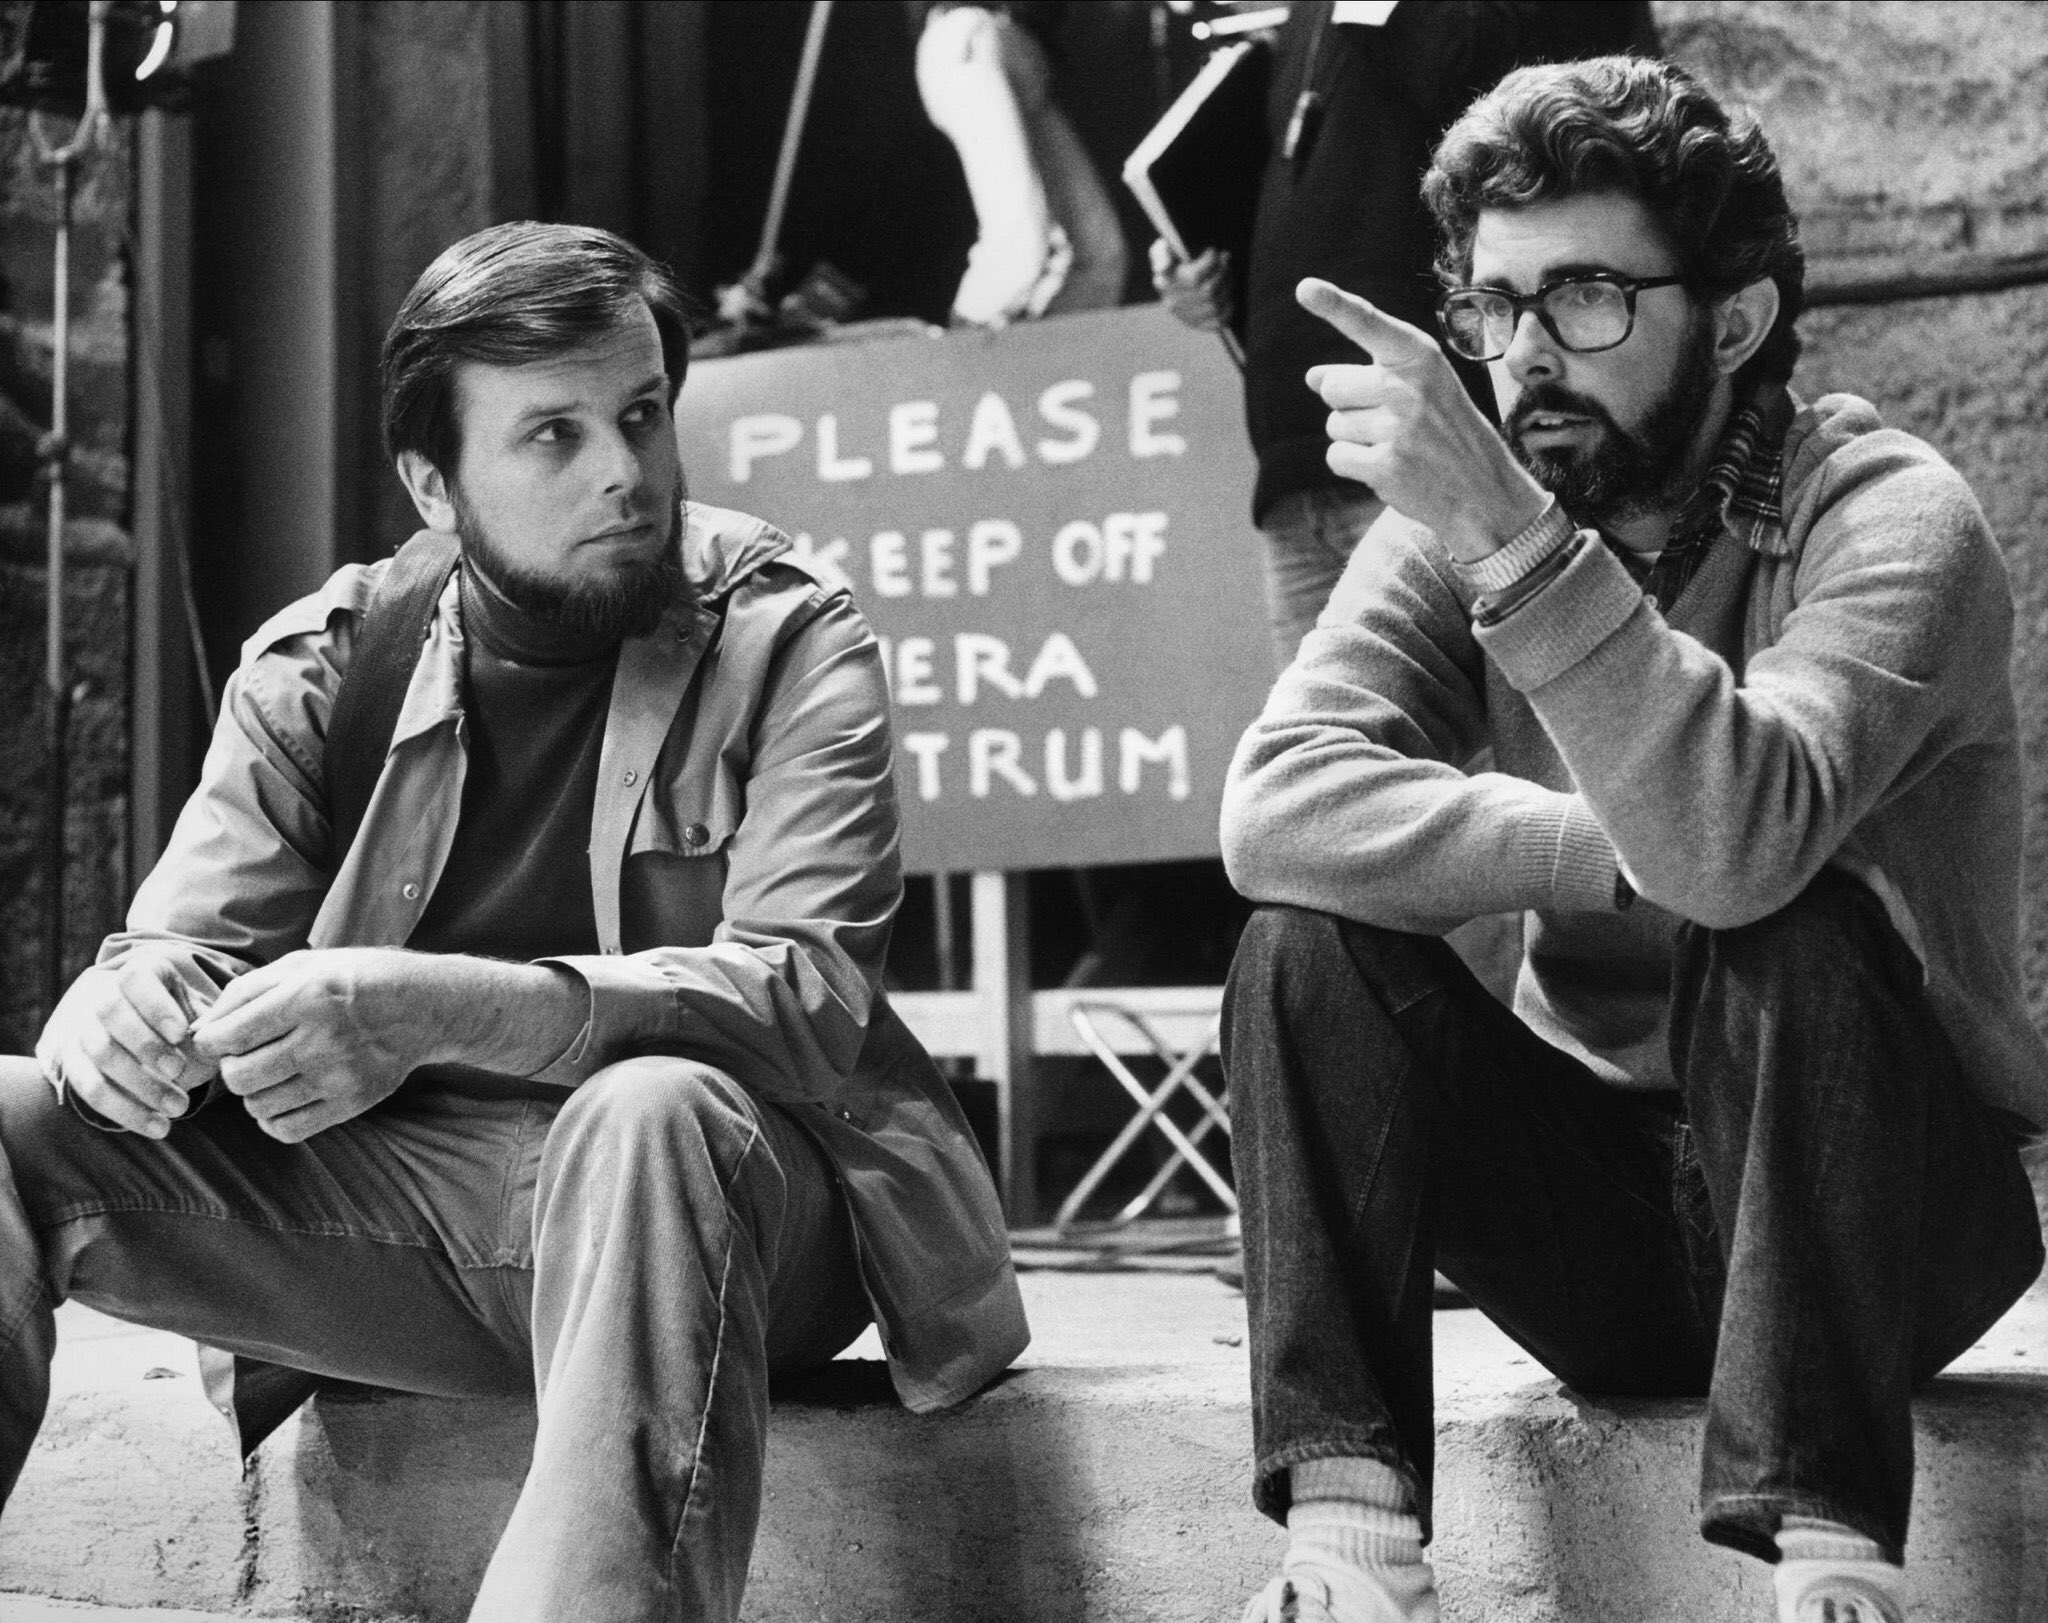 Happy birthday to Gary Kurtz. The legendary Star Wars producer would have turned 80 years old today. 